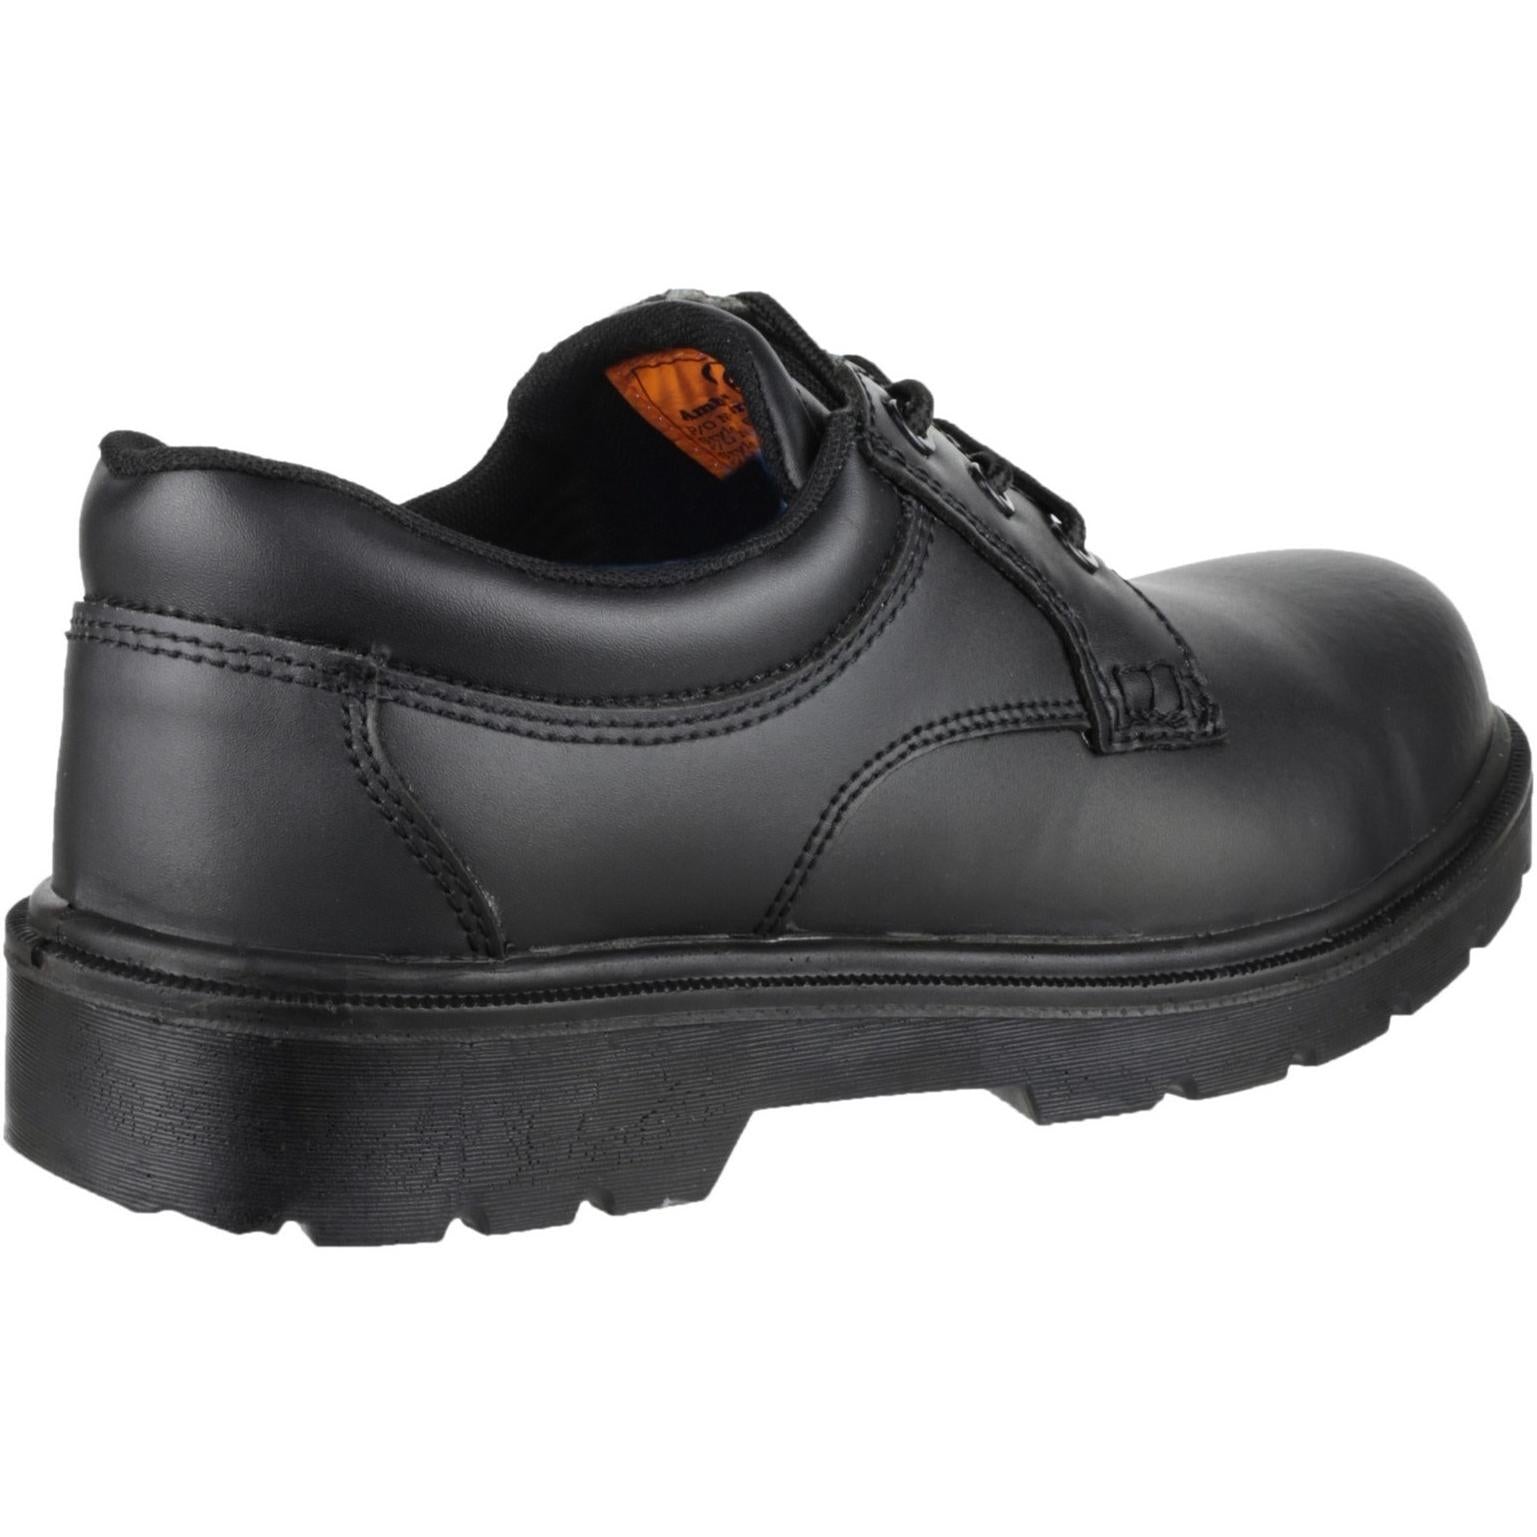 Amblers Safety FS38C Metal Free Composite Gibson Lace Safety Shoe